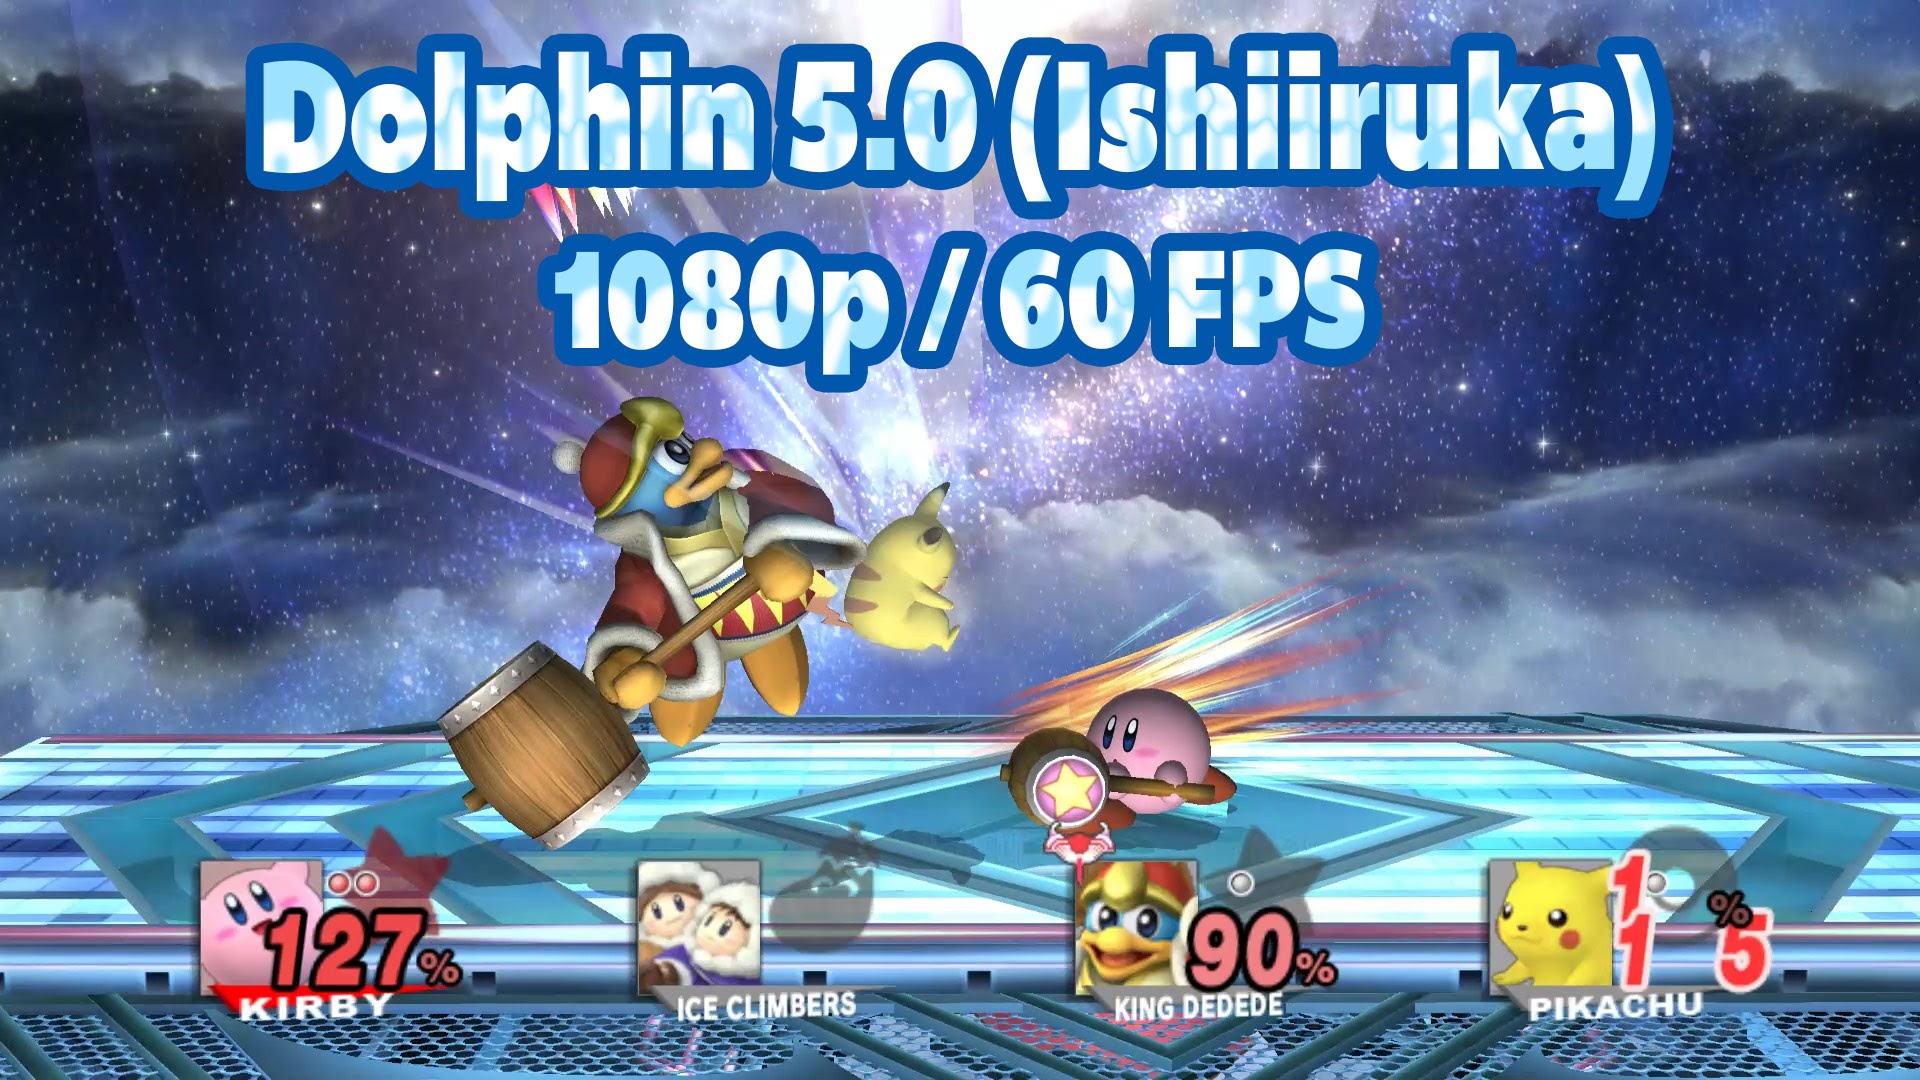 dolphin emulator 5.0 android